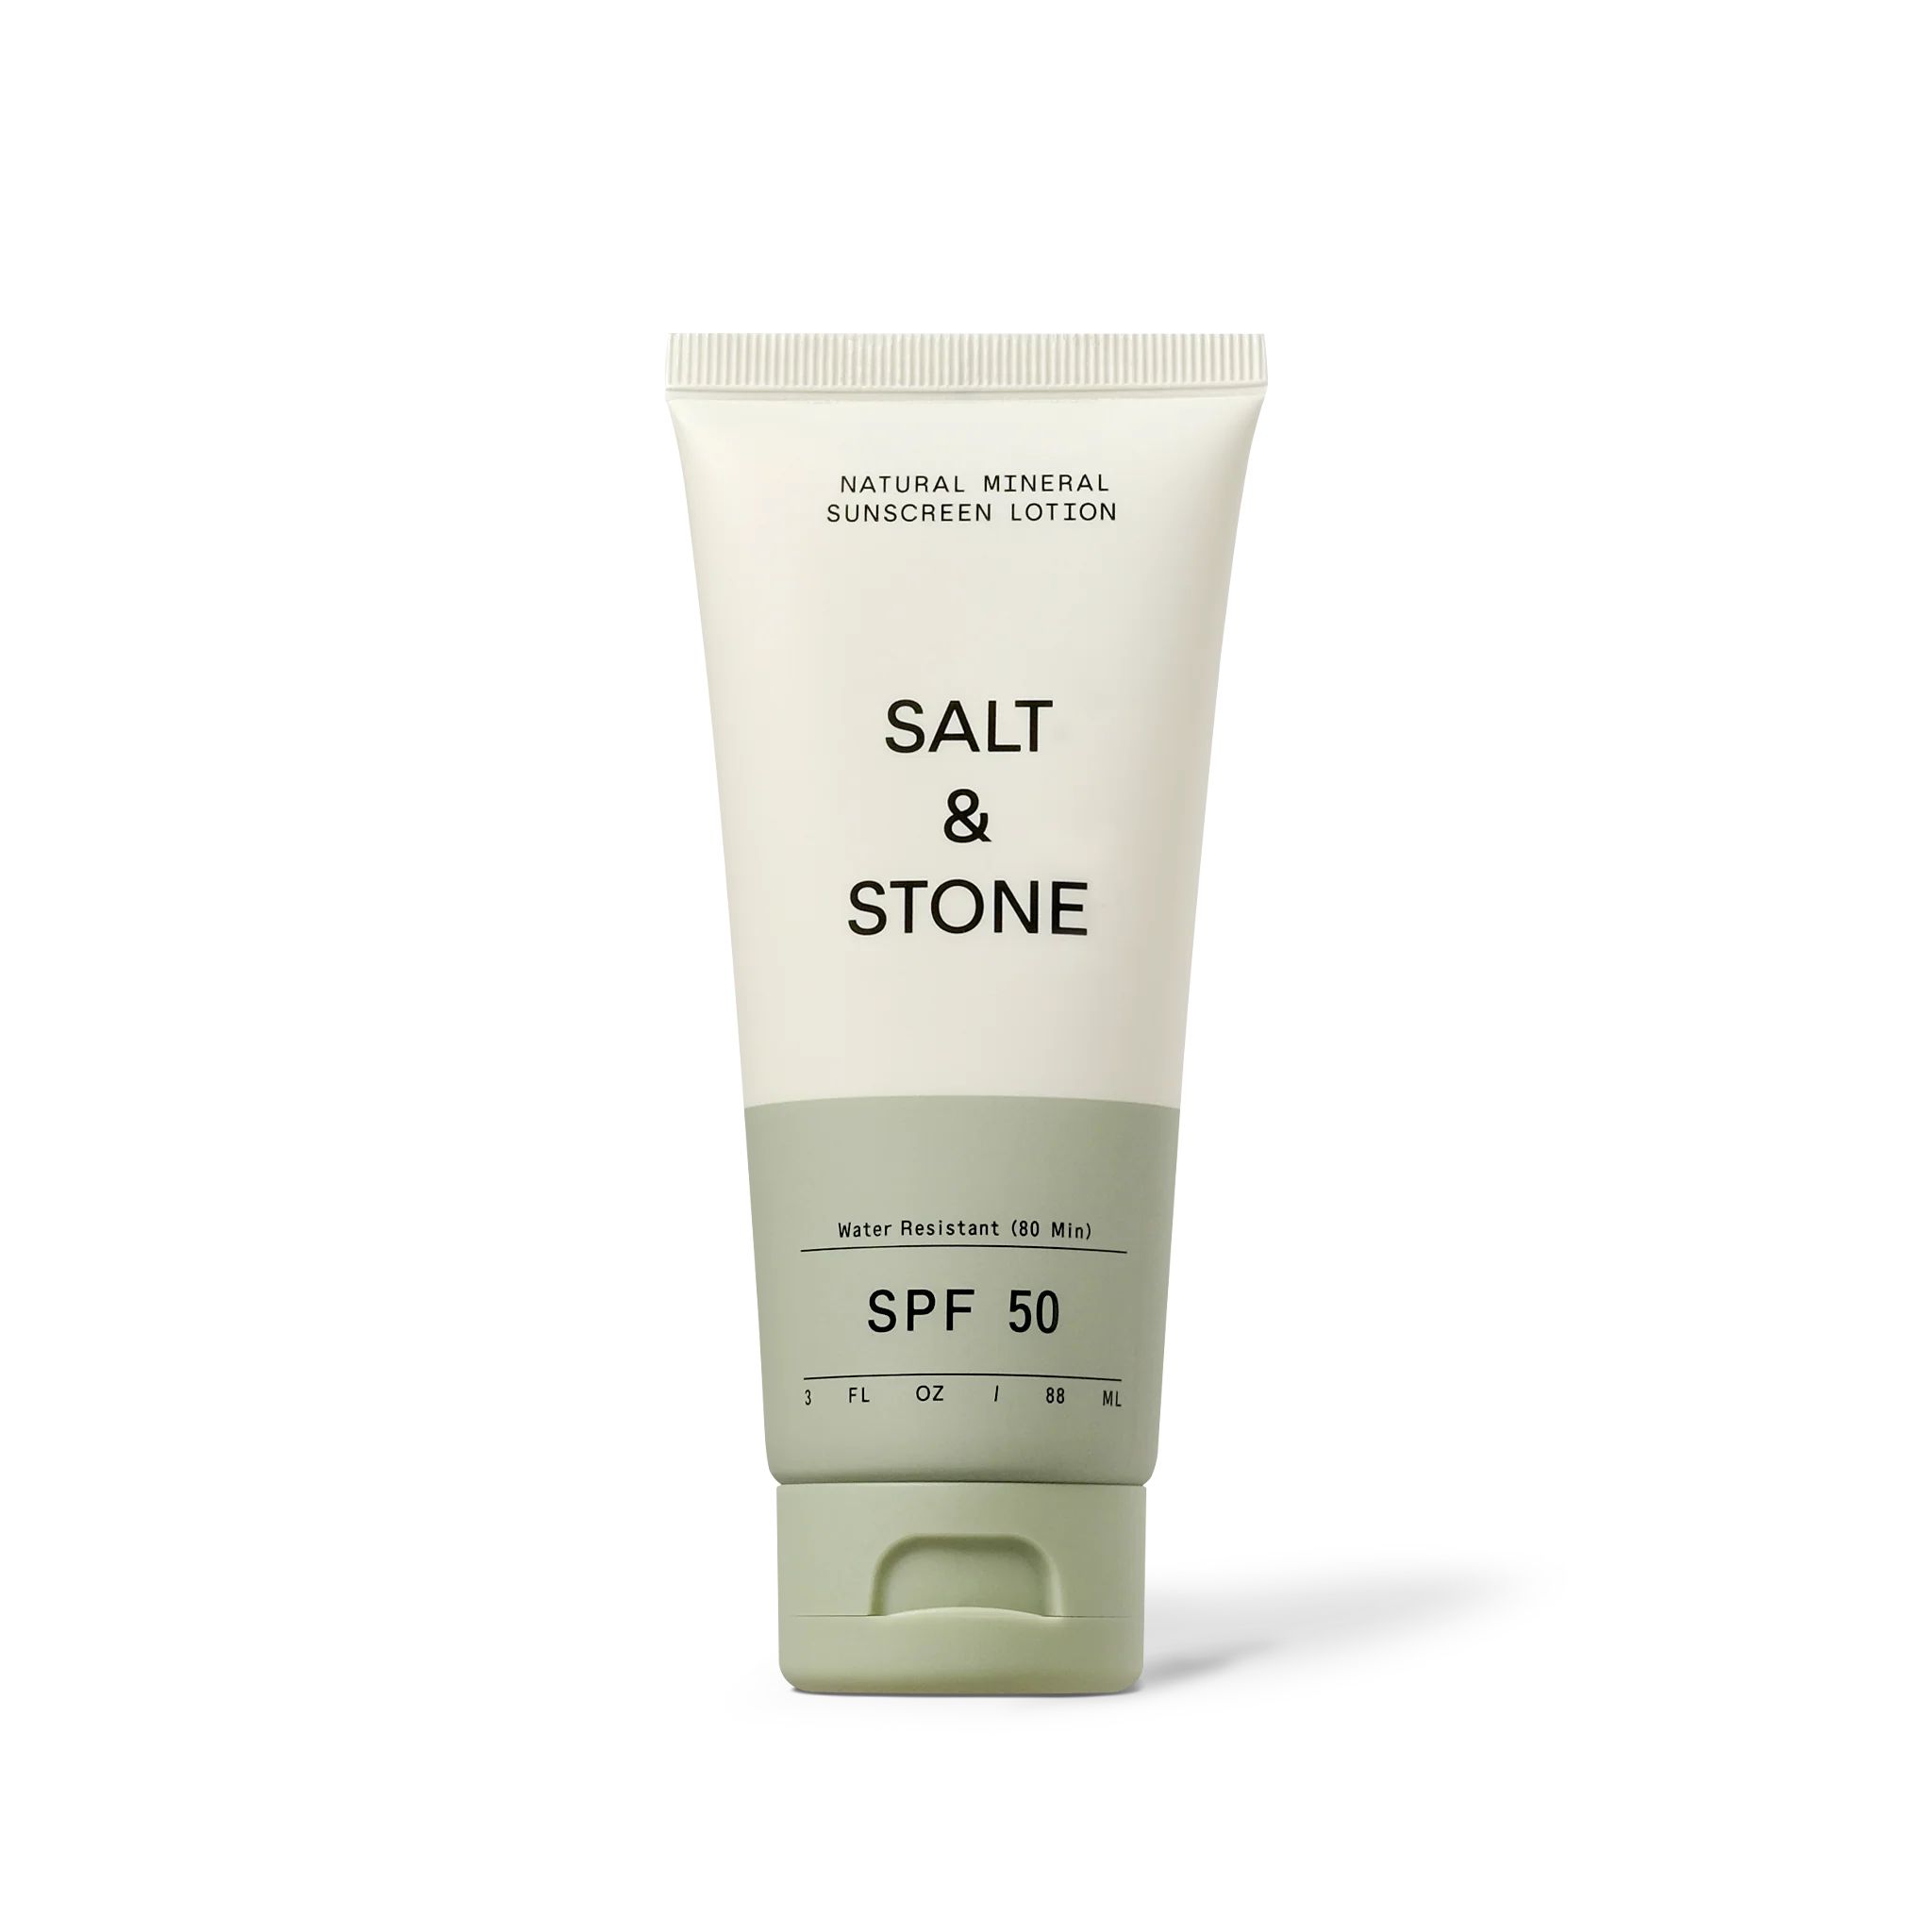 Natural Mineral Sunscreen Lotion SPF 50 | Salt & Stone